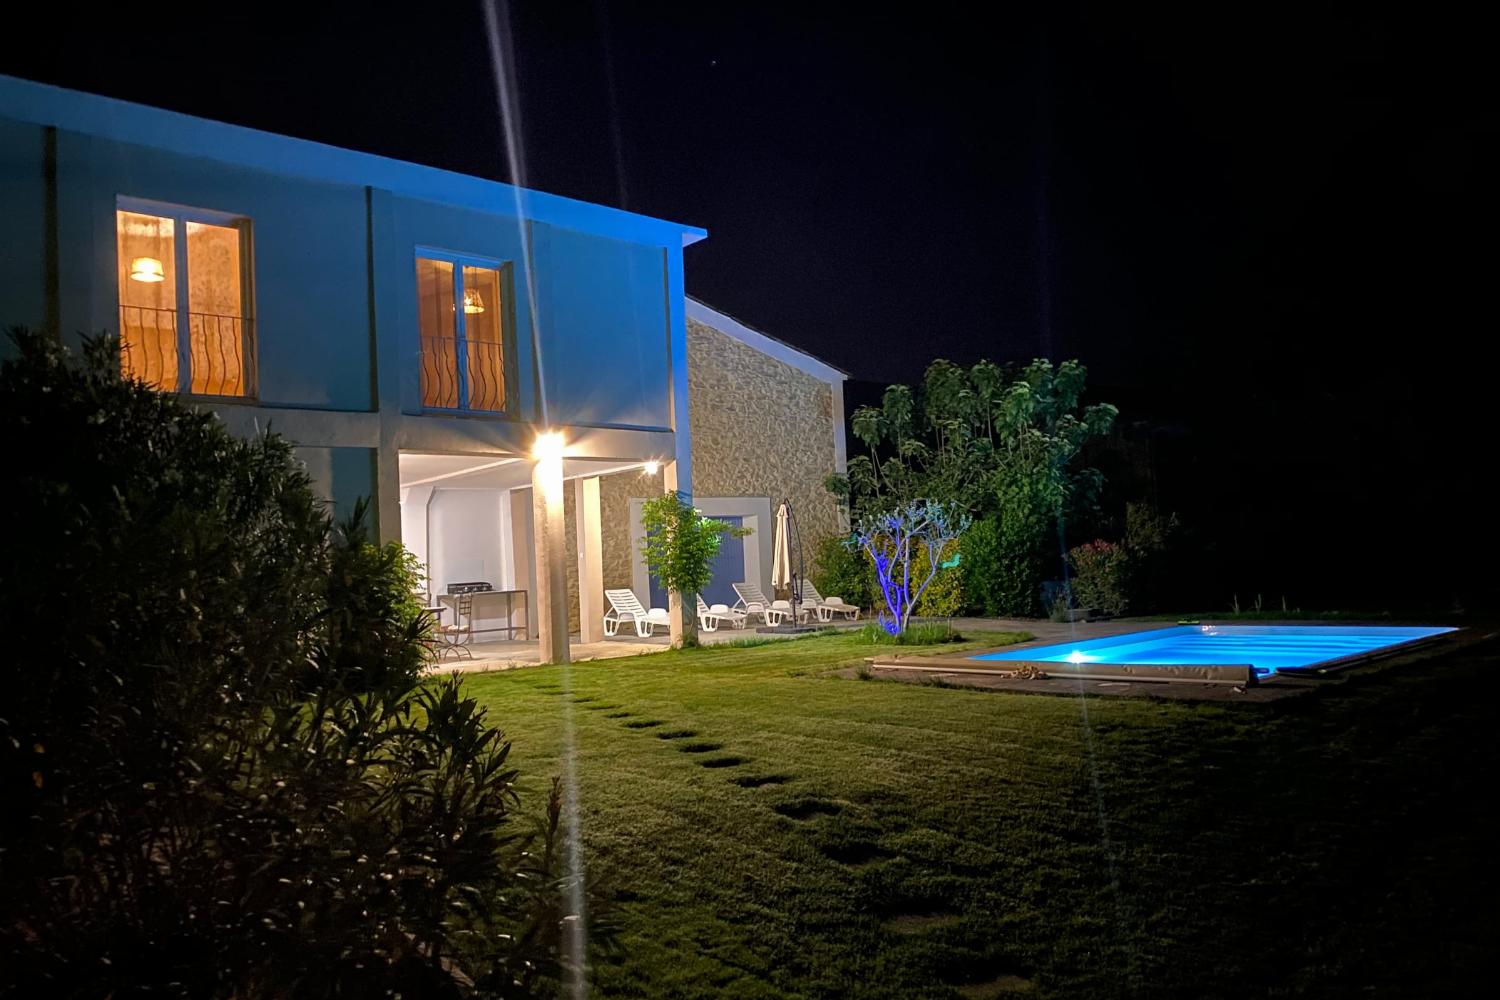 Vacation home in the South of France with private pool at night